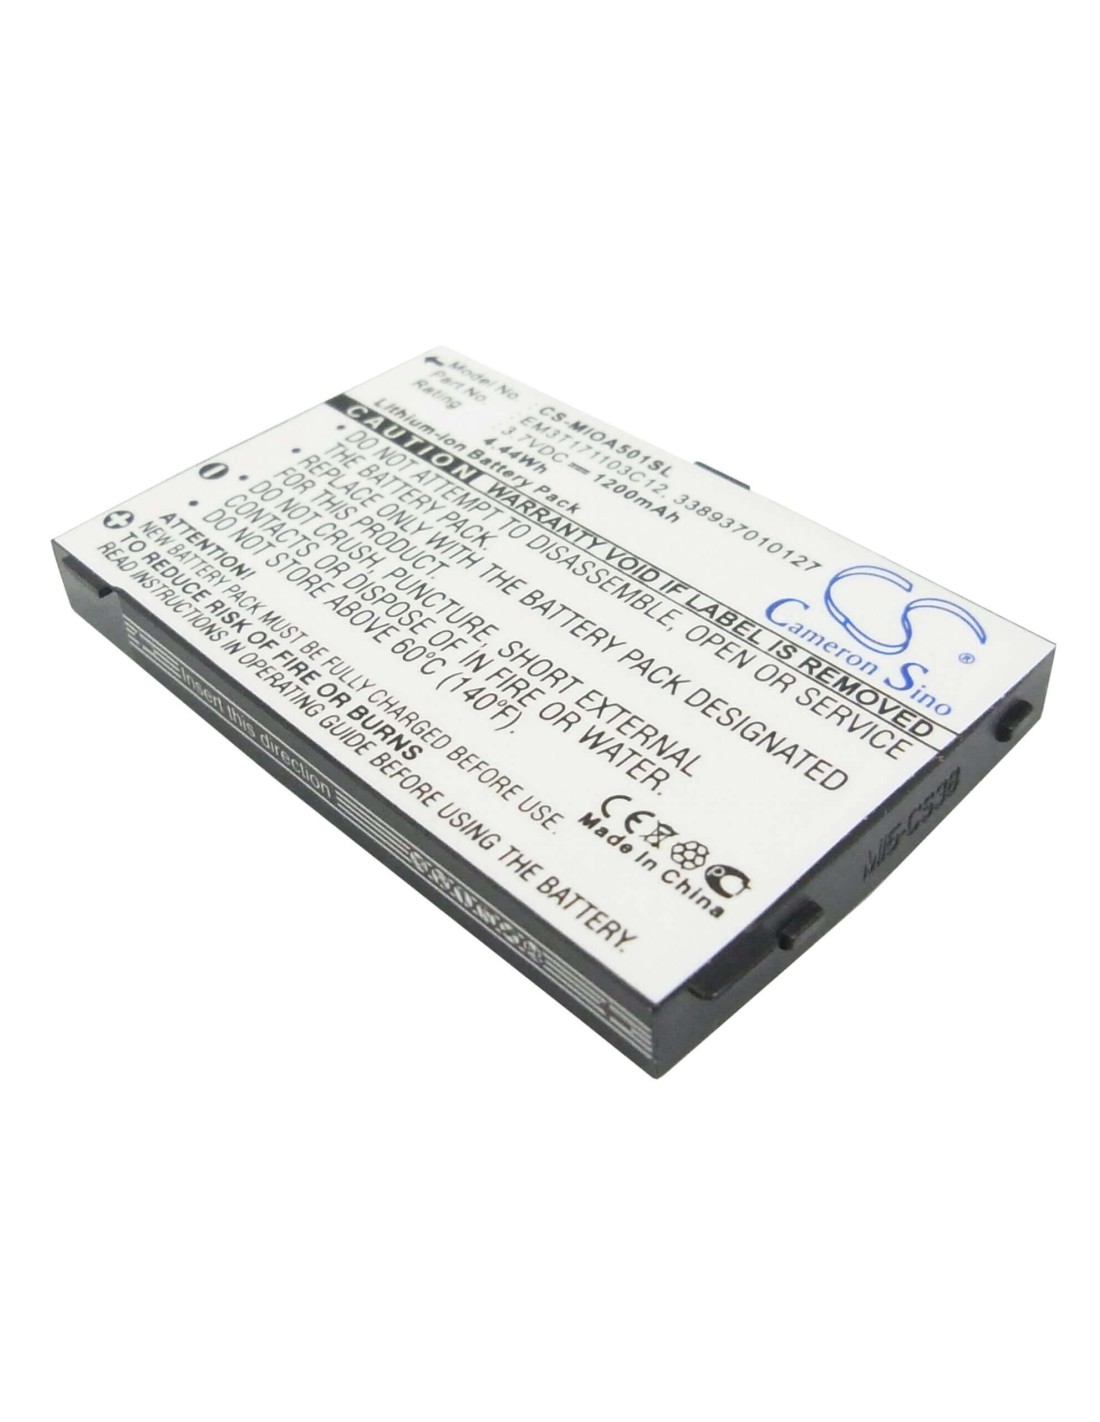 Battery for Mitac Mio A500, Mio A501, Mio A502 3.7V, 1200mAh - 4.44Wh